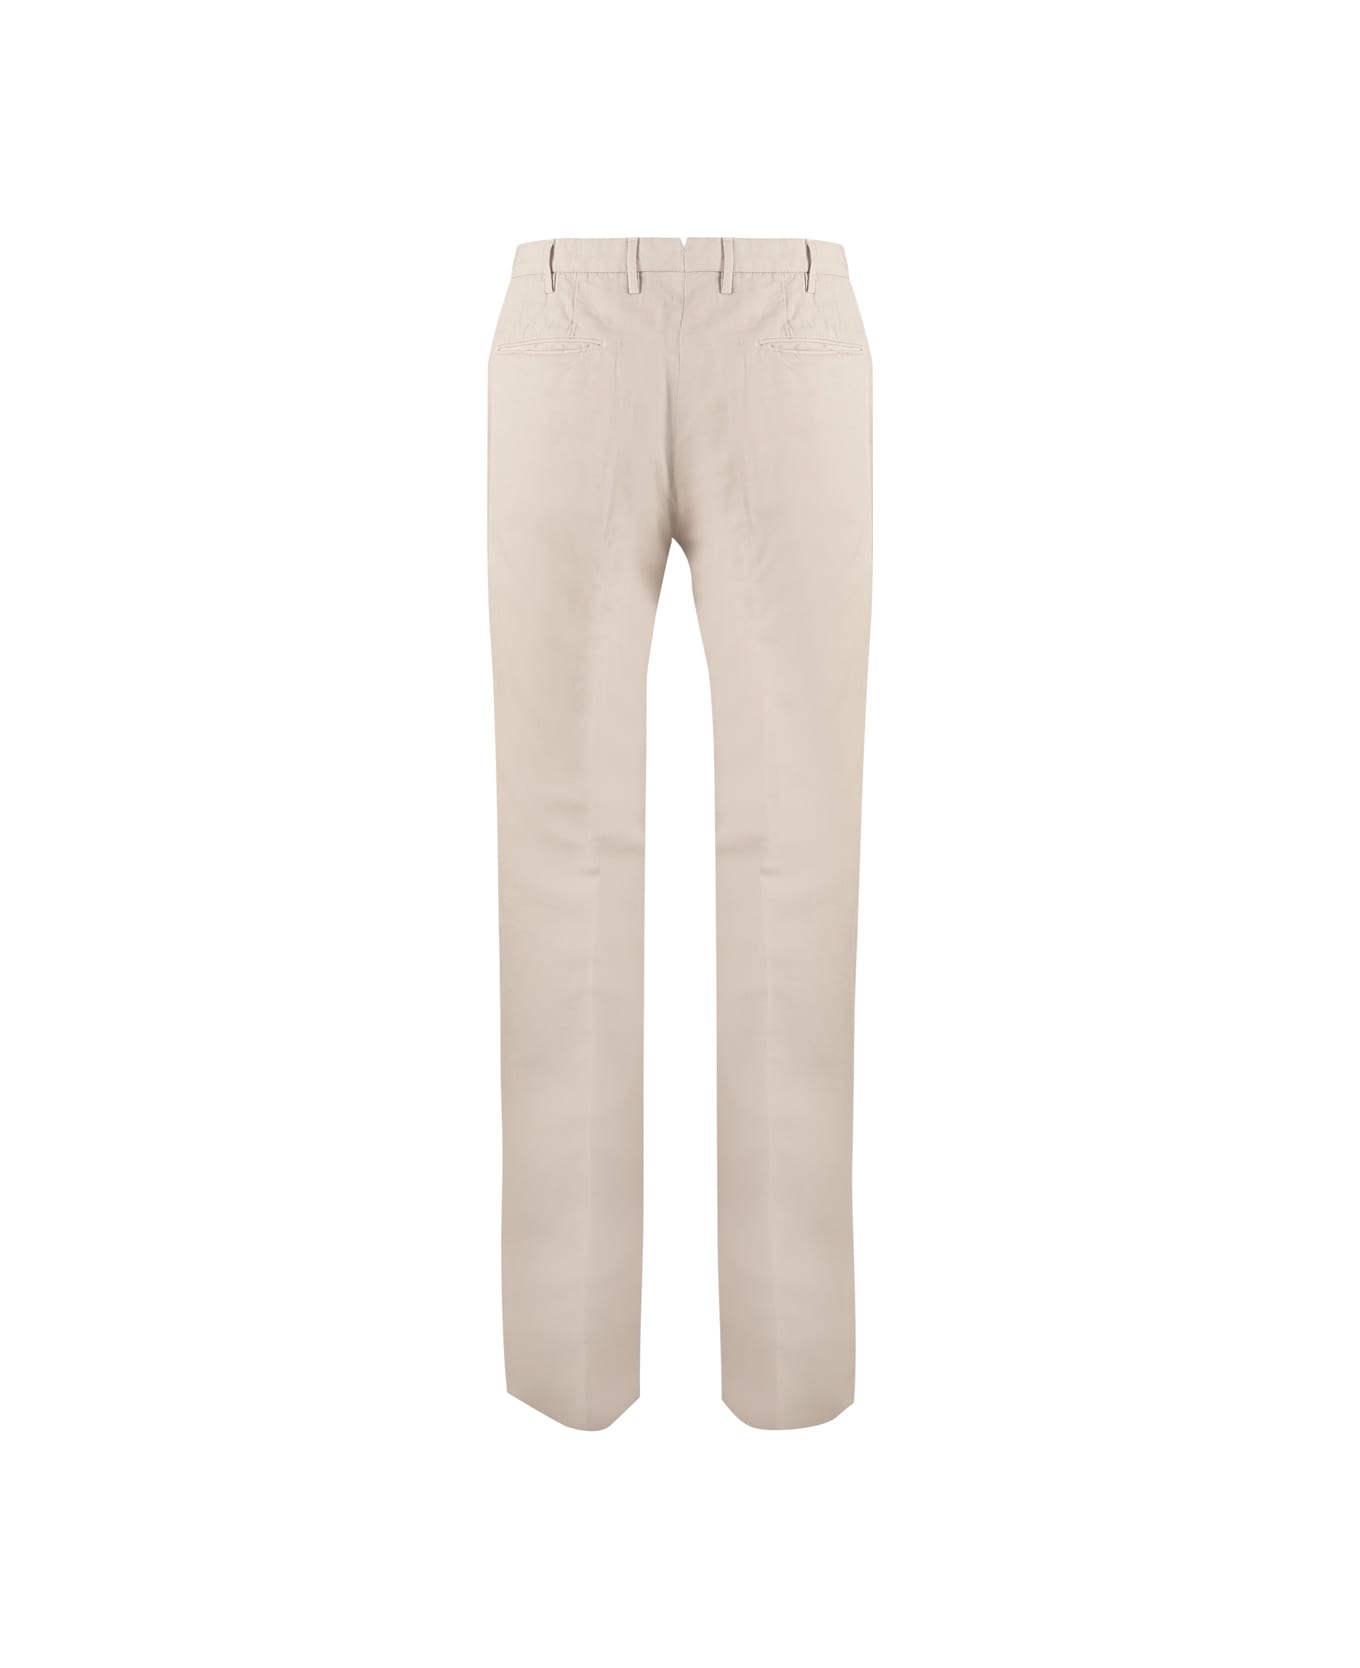 Incotex Trousers In Cotton Blend Twill - Beige